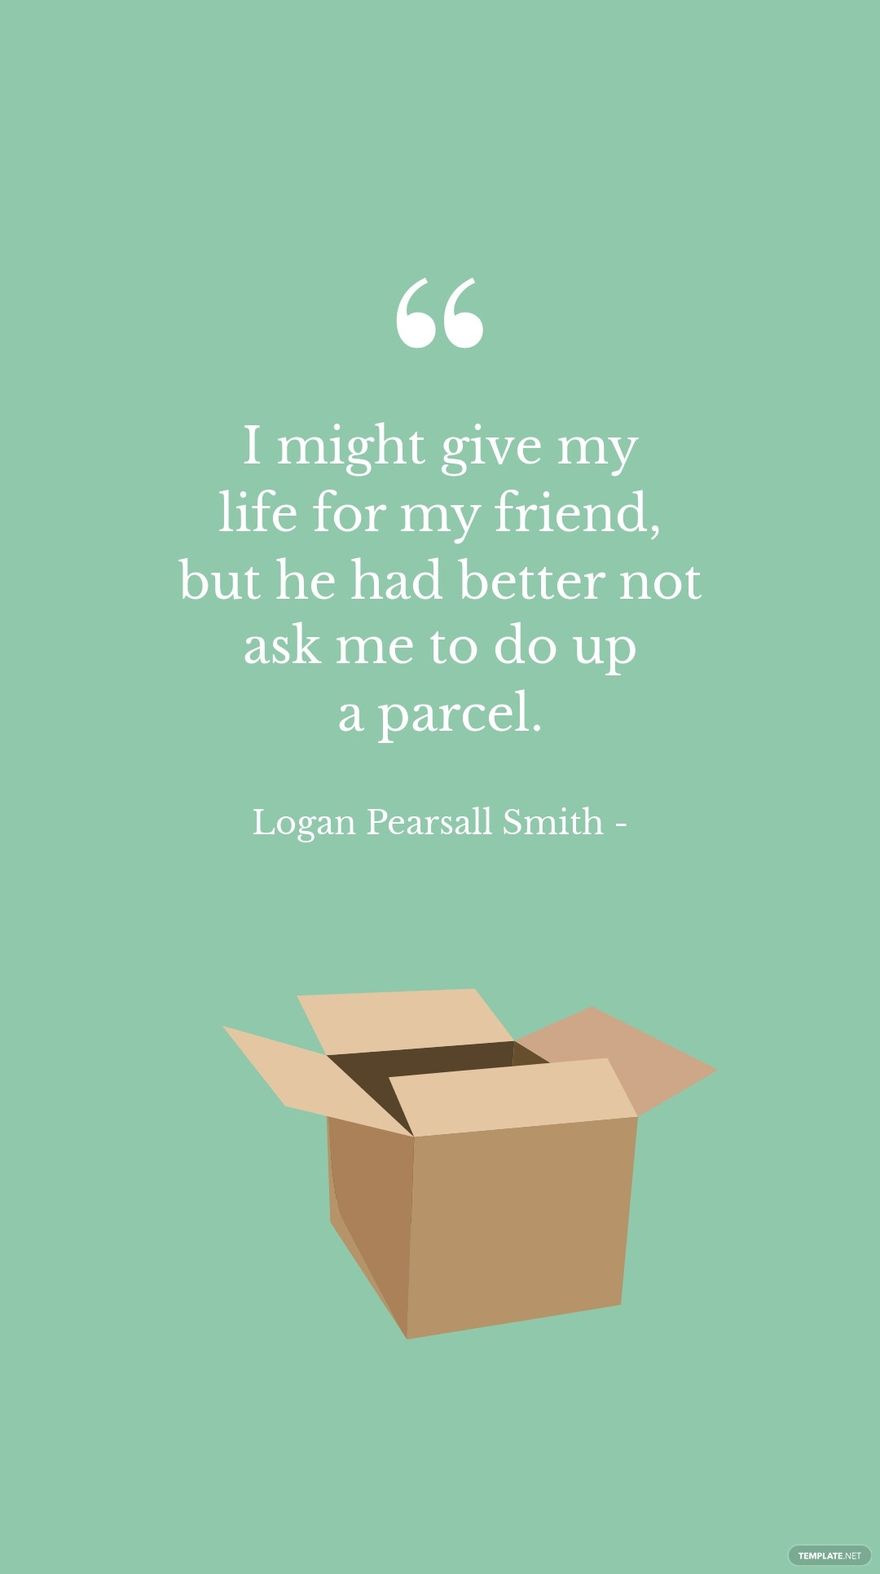 Logan Pearsall Smith - I might give my life for my friend, but he had better not ask me to do up a parcel.